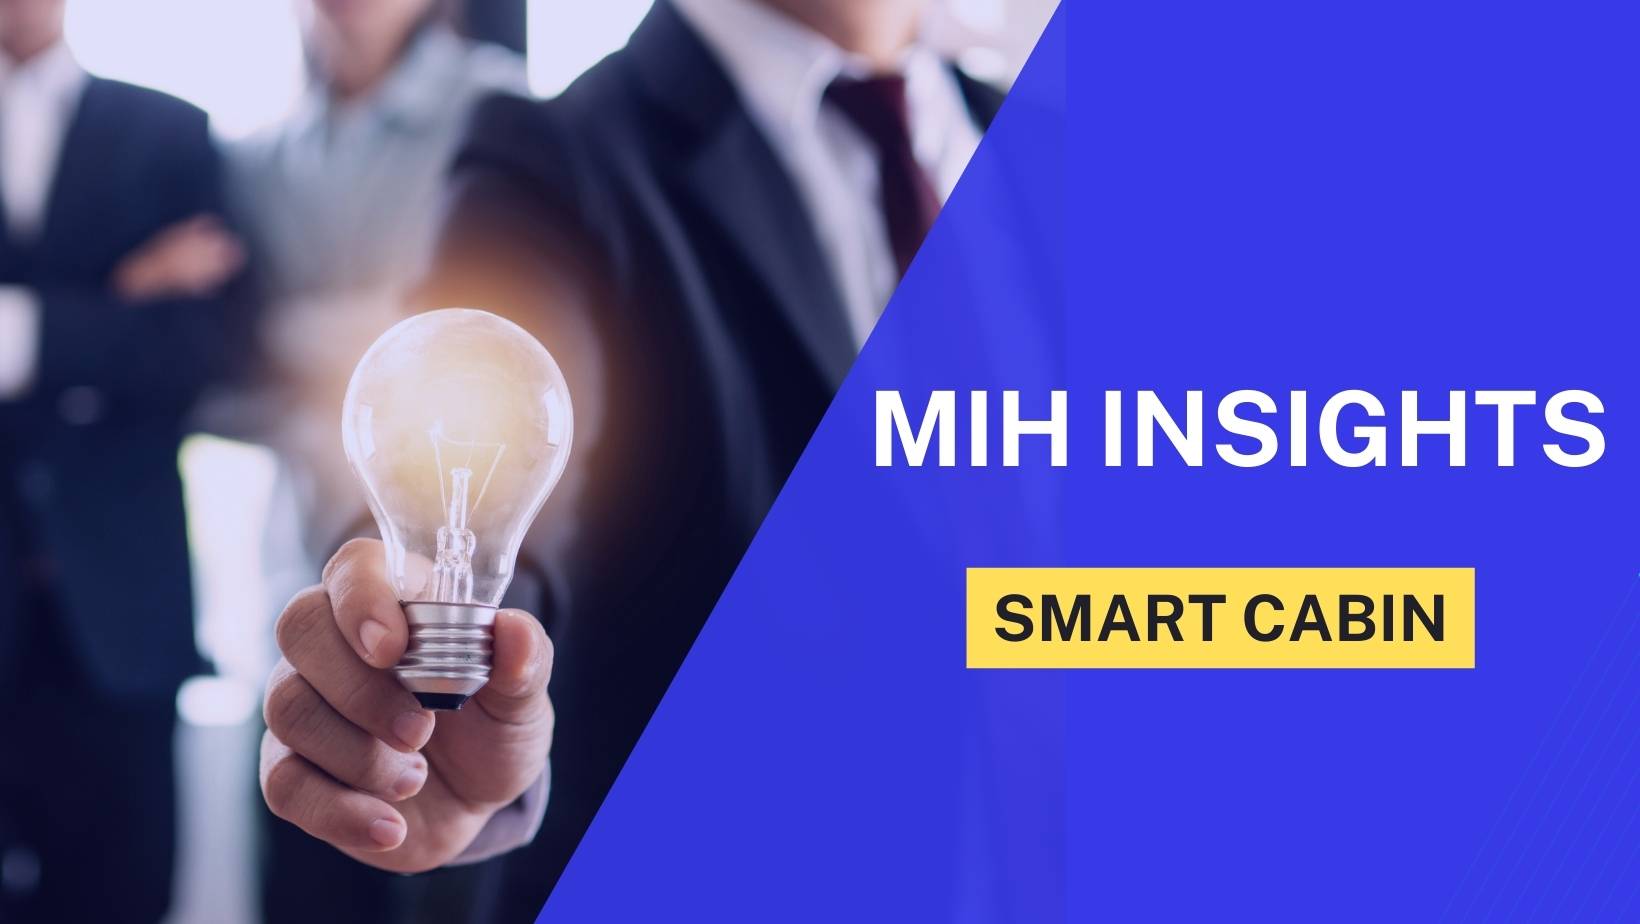 [MIH Insights] Four Major Trends of Smart Cabin to Satisfy Multisensory Experience 